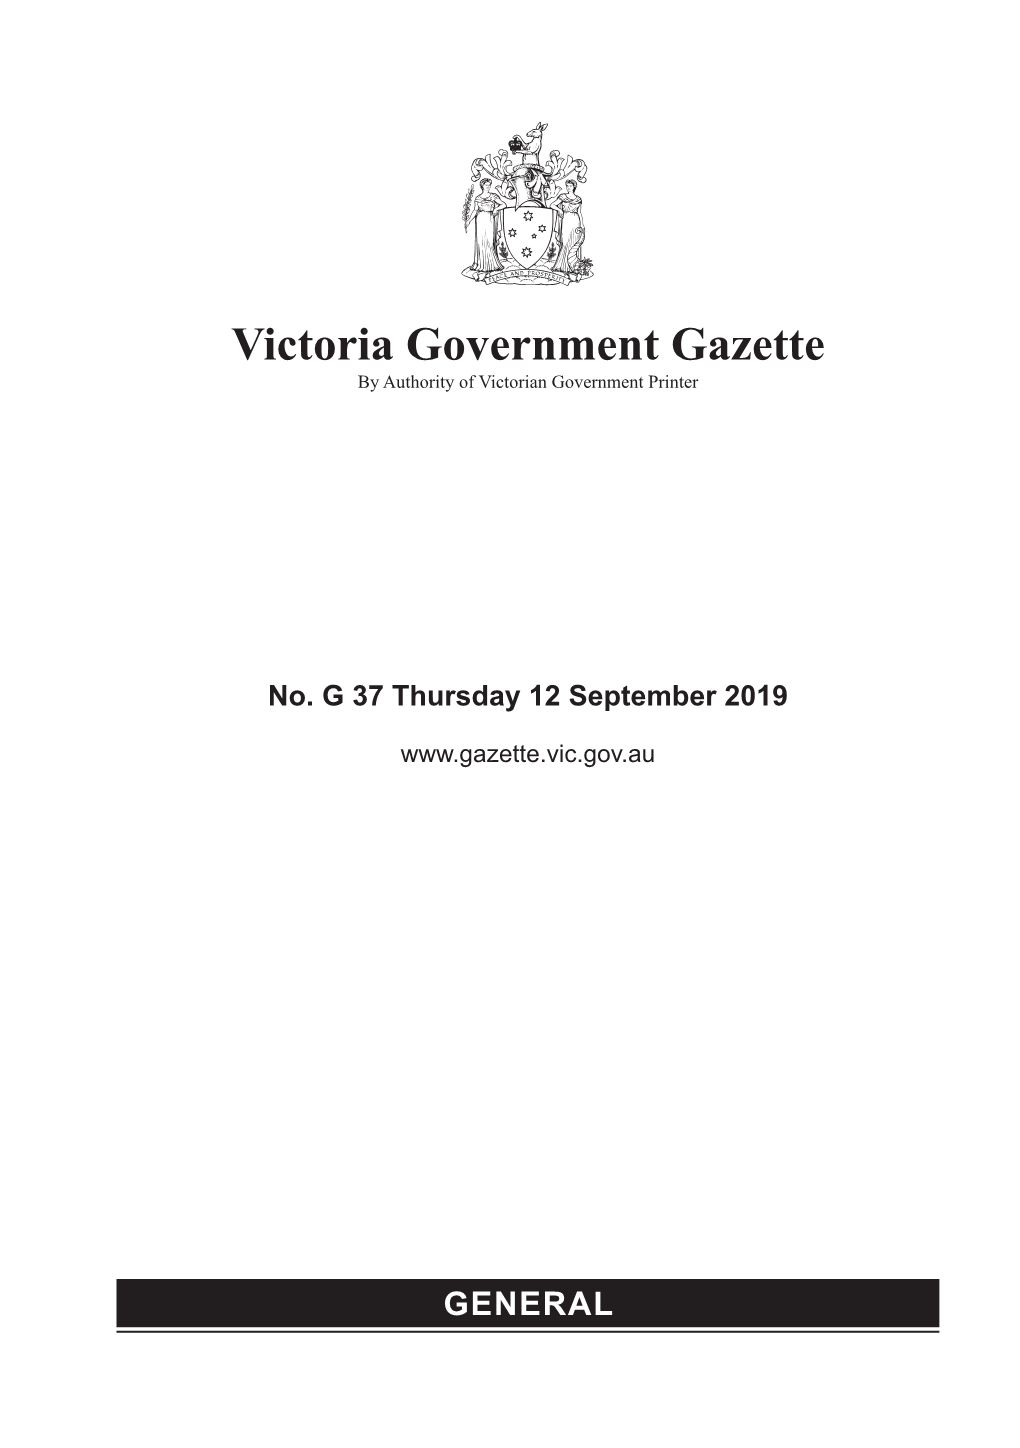 Victoria Government Gazette by Authority of Victorian Government Printer